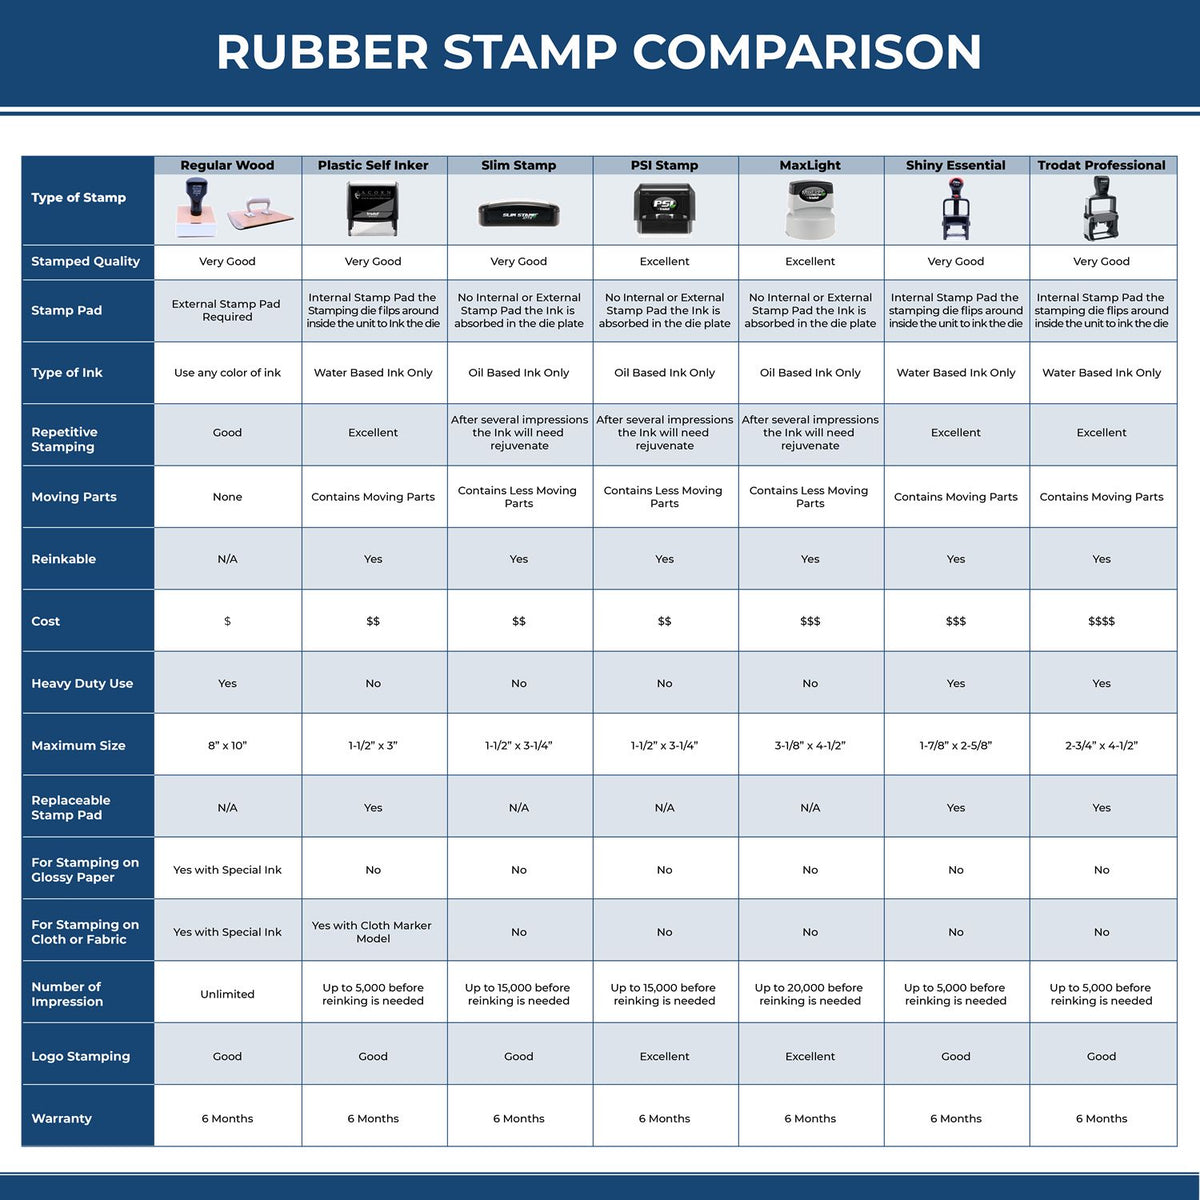 Confidential with Envelope Rubber Stamp 4821R Rubber Stamp Comparison